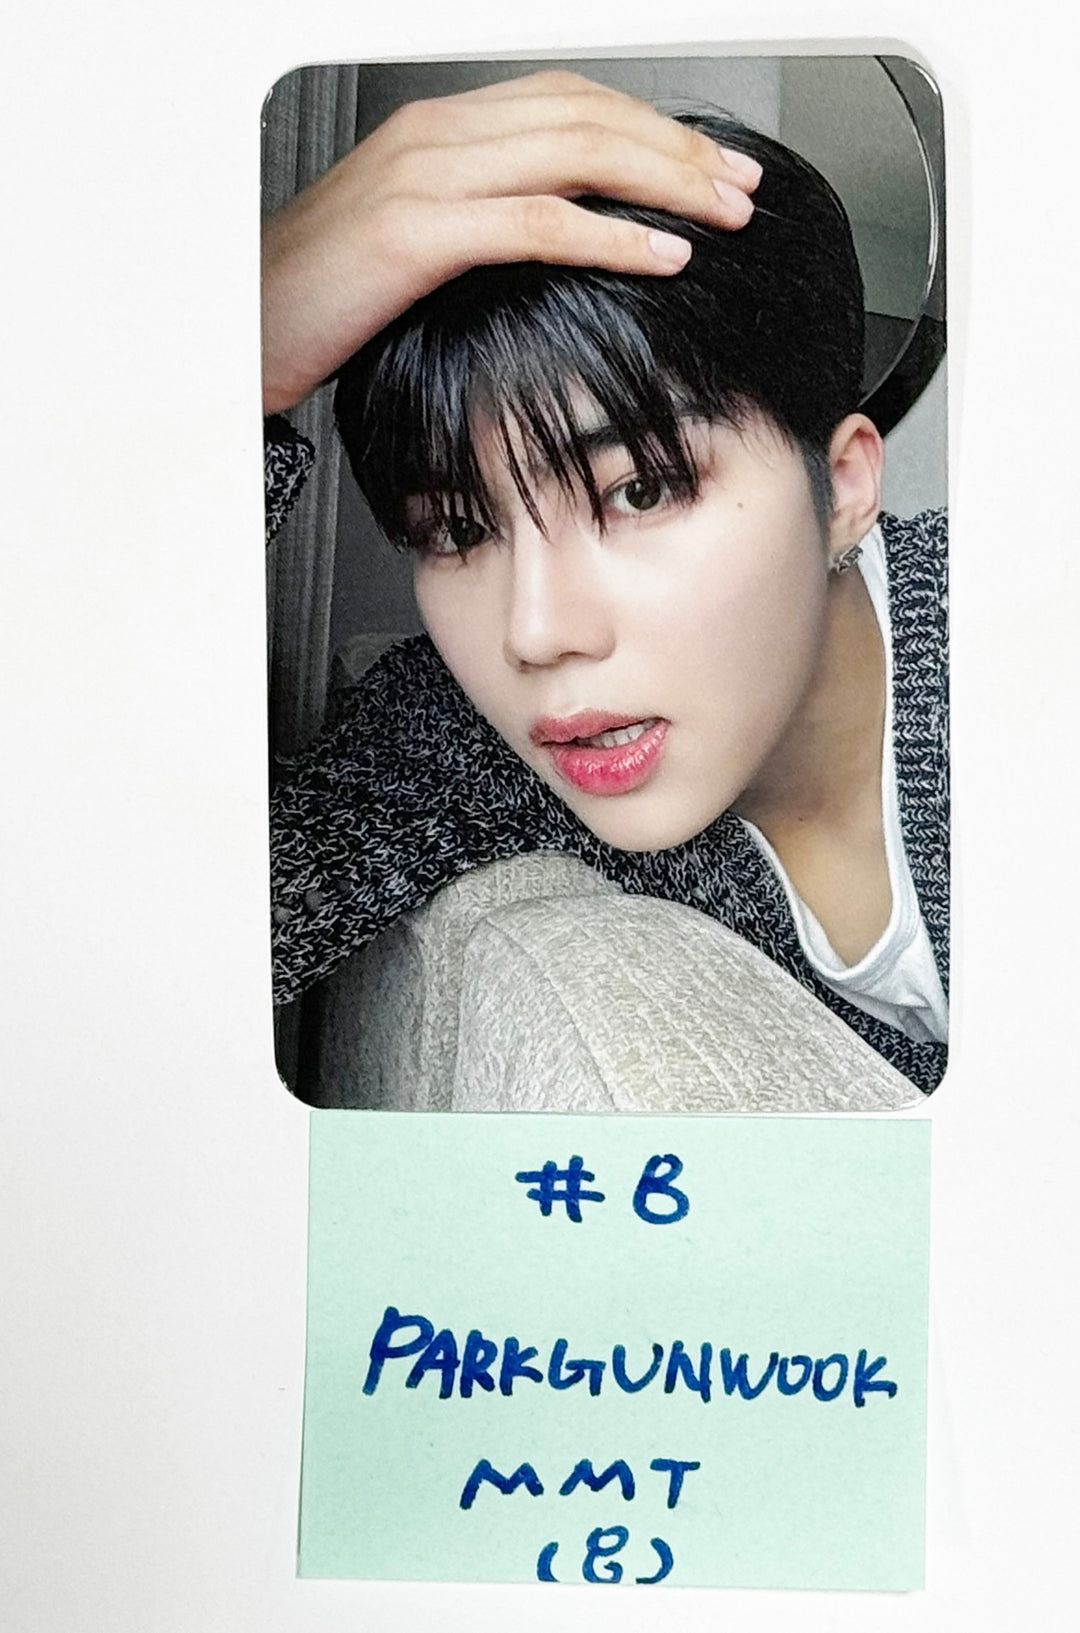 ZEROBASEONE(ZB1) "You had me at HELLO" - MMT Pre-Order Benefit Photocard [24.6.5]